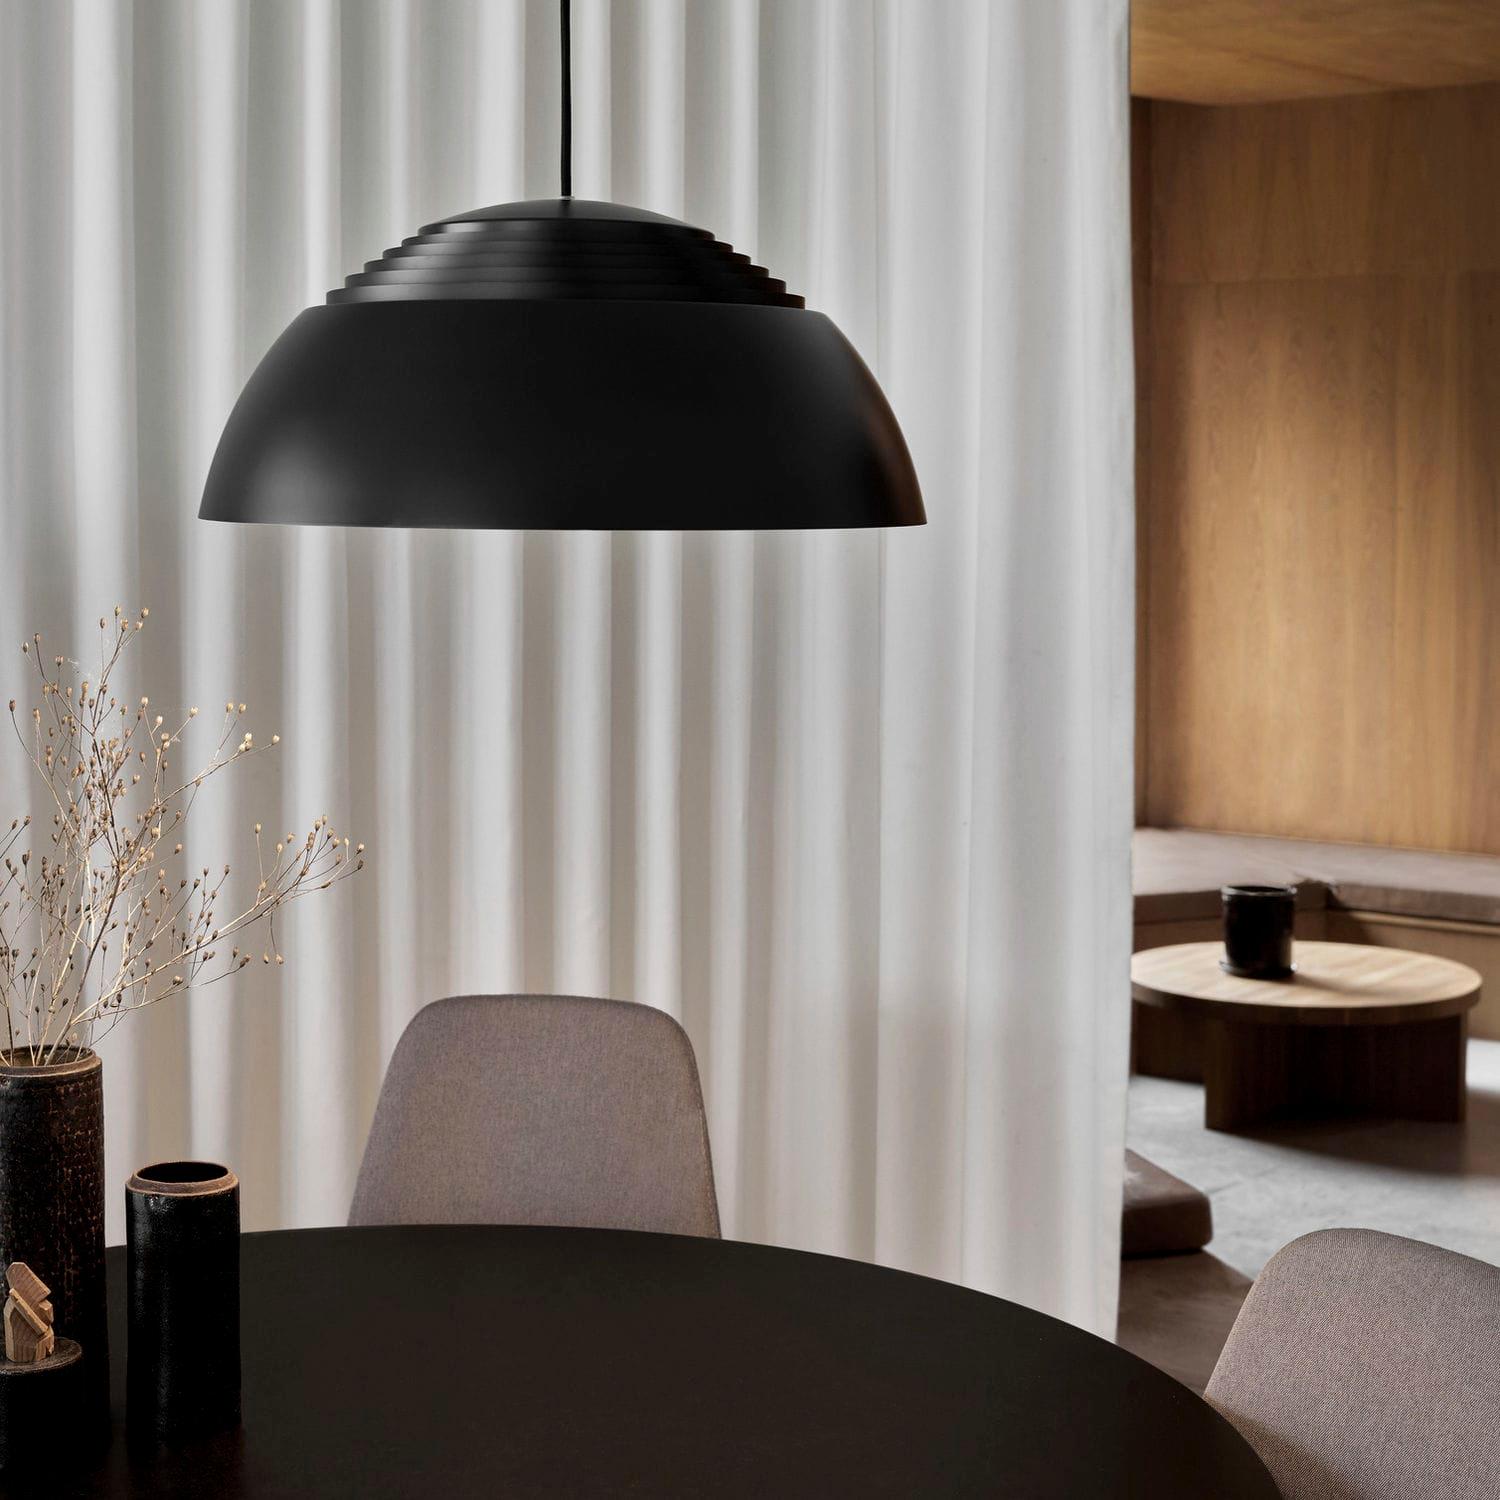 Large AJ Royal Pendant in Black by Arne Jacobsen for Louis Poulsen In New Condition For Sale In Glendale, CA